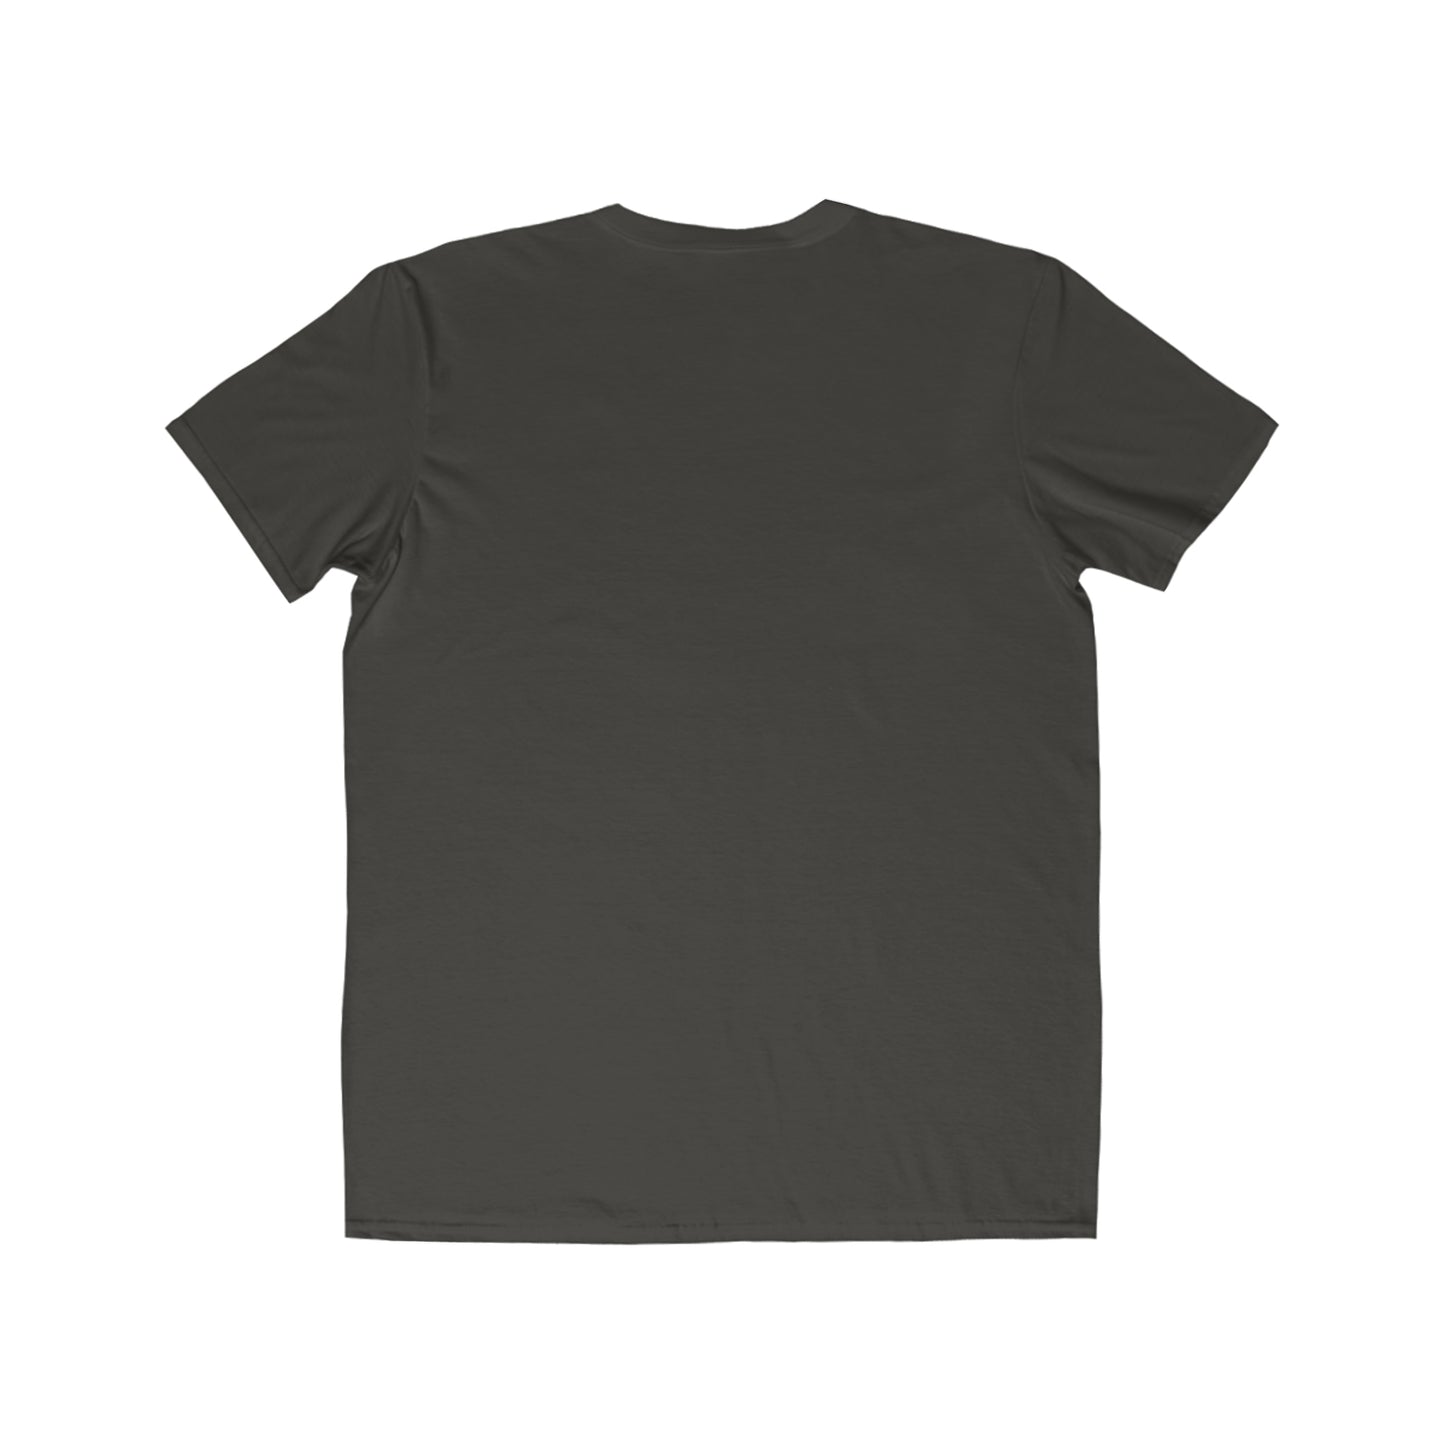 12 New Chapters Men's Lightweight Fashion Tee